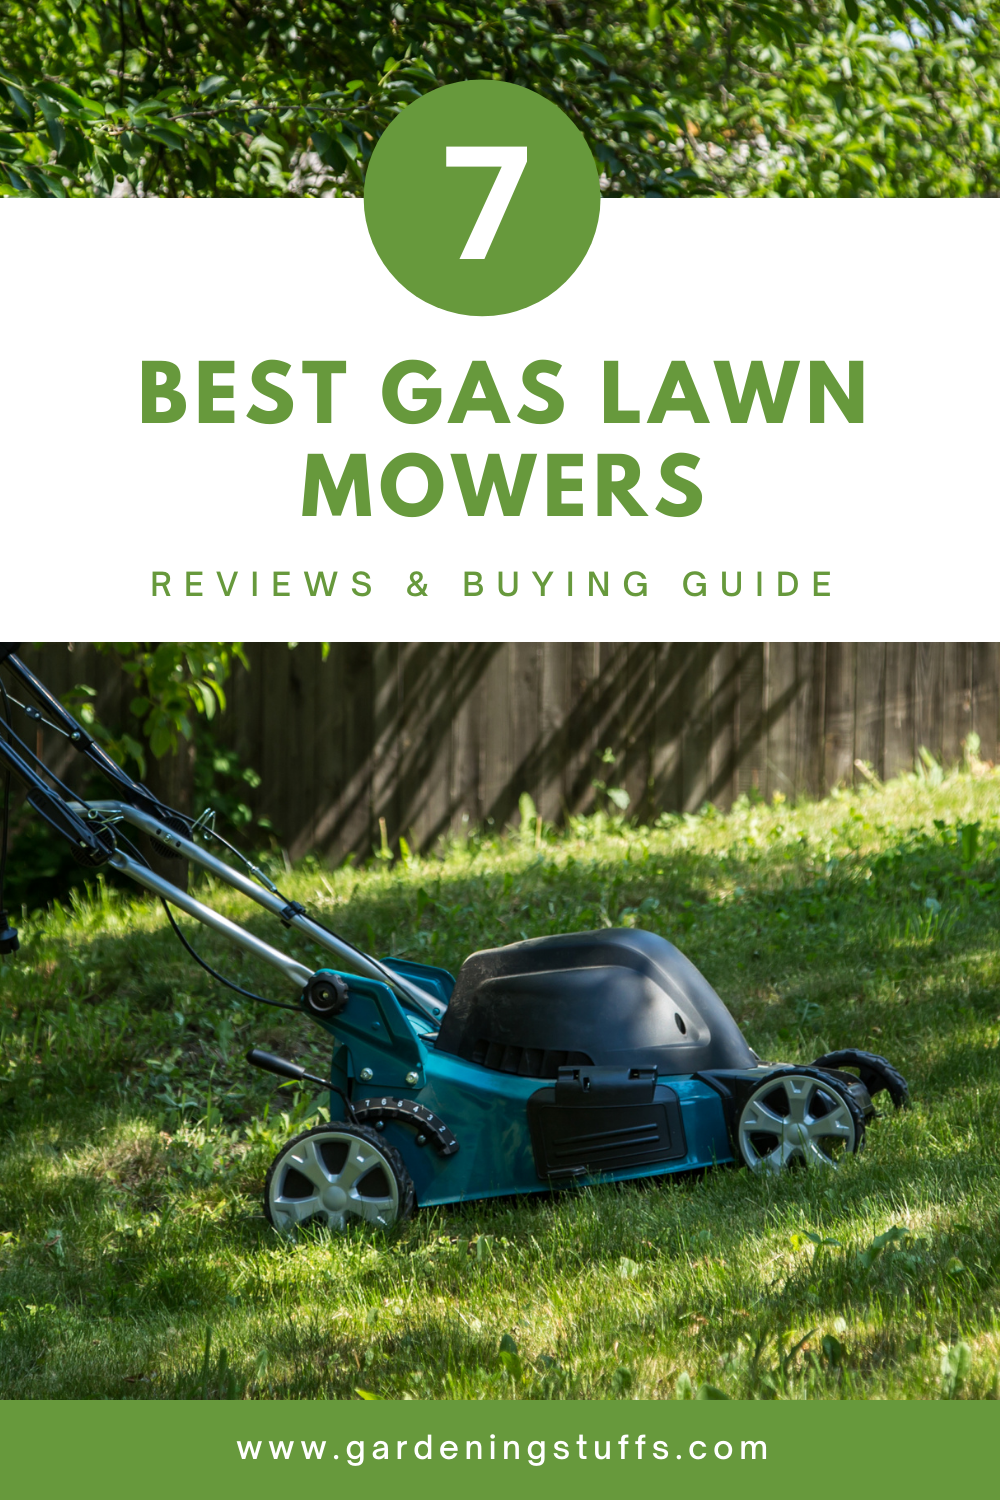 Functional gas lawn mowers help you maintain your yard and mow your lawns. When you’re ready to buy one, you may be overwhelmed with loads of gas lawn mower options. We’ve listed down the best gas lawn mower and their key features plus the things to consider to help you choose the best one for you.